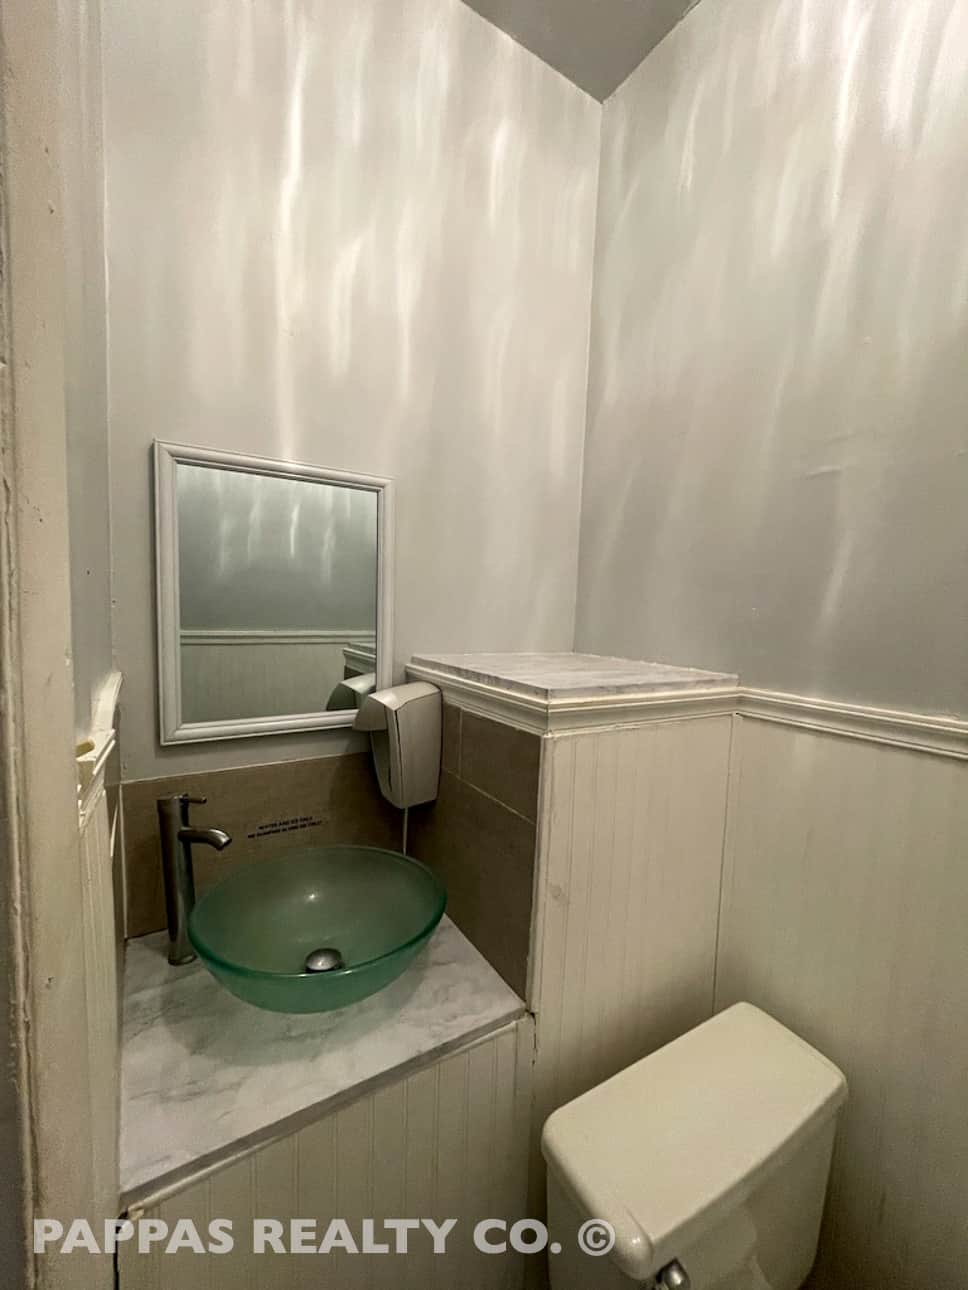 Bathroom 3450 Manchester Rd. Akron, OH 44319 - For Lease - Pappas Realty Co.